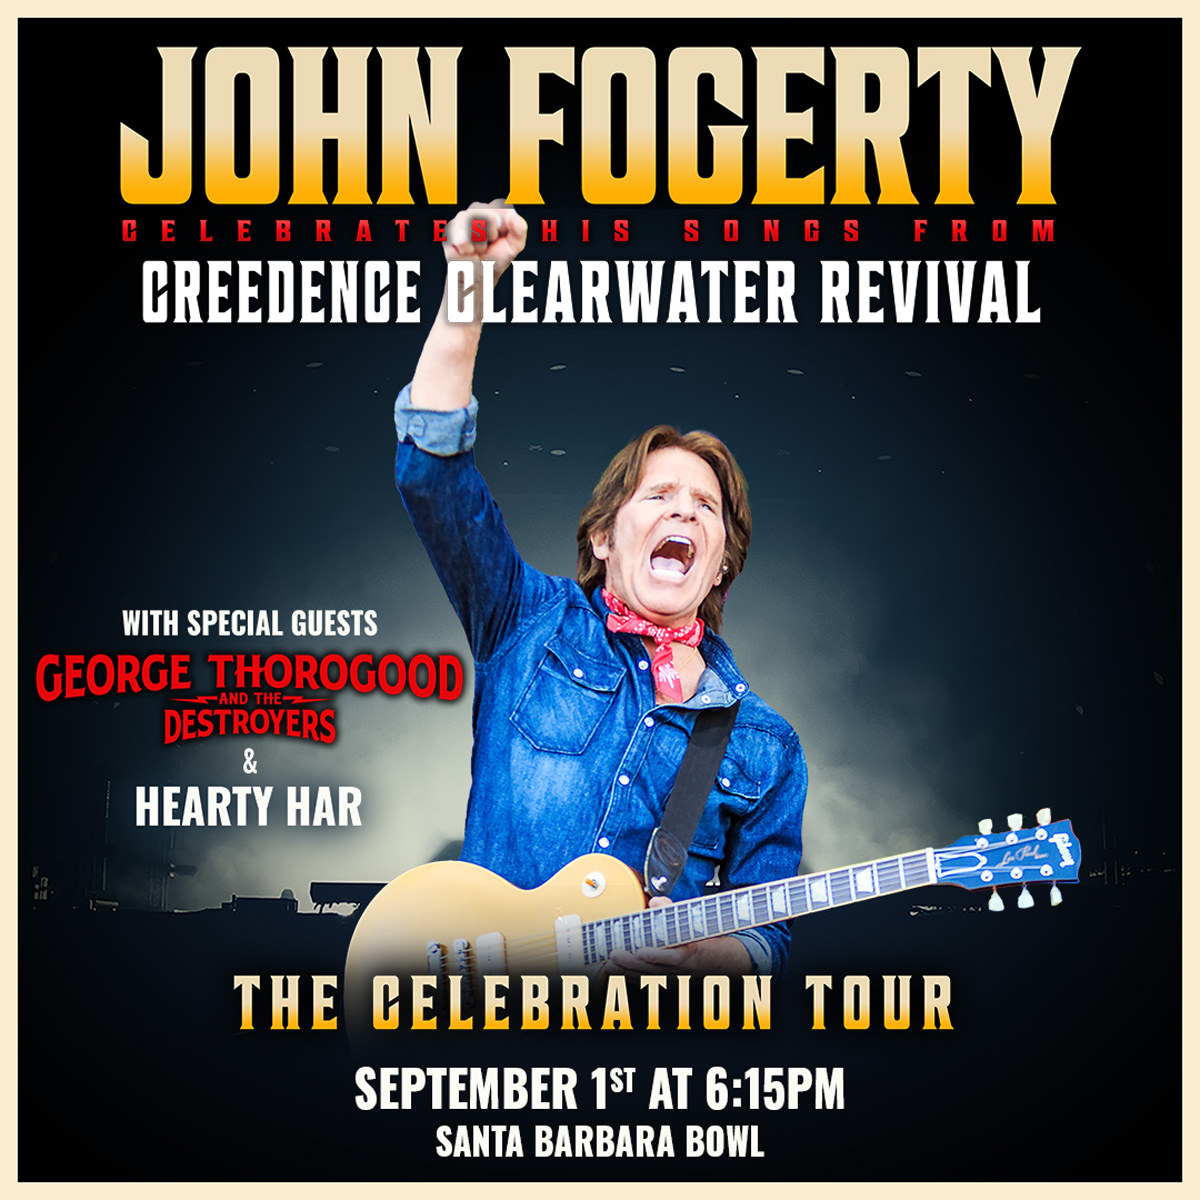 @sbbowl welcomes @JohnFogerty, 'The Celebration Tour' on 9/1! Special guests @ThorogoodMusic & The Destroyers & @HeartyHar! 🎟️ Tix on sale: 4/12 at 10 AM 🎟️ Purchase tickets at the Bowl Box Office or on sbbowl.com #SBBowl #SBBowlSeason2024 #JohnFogerty